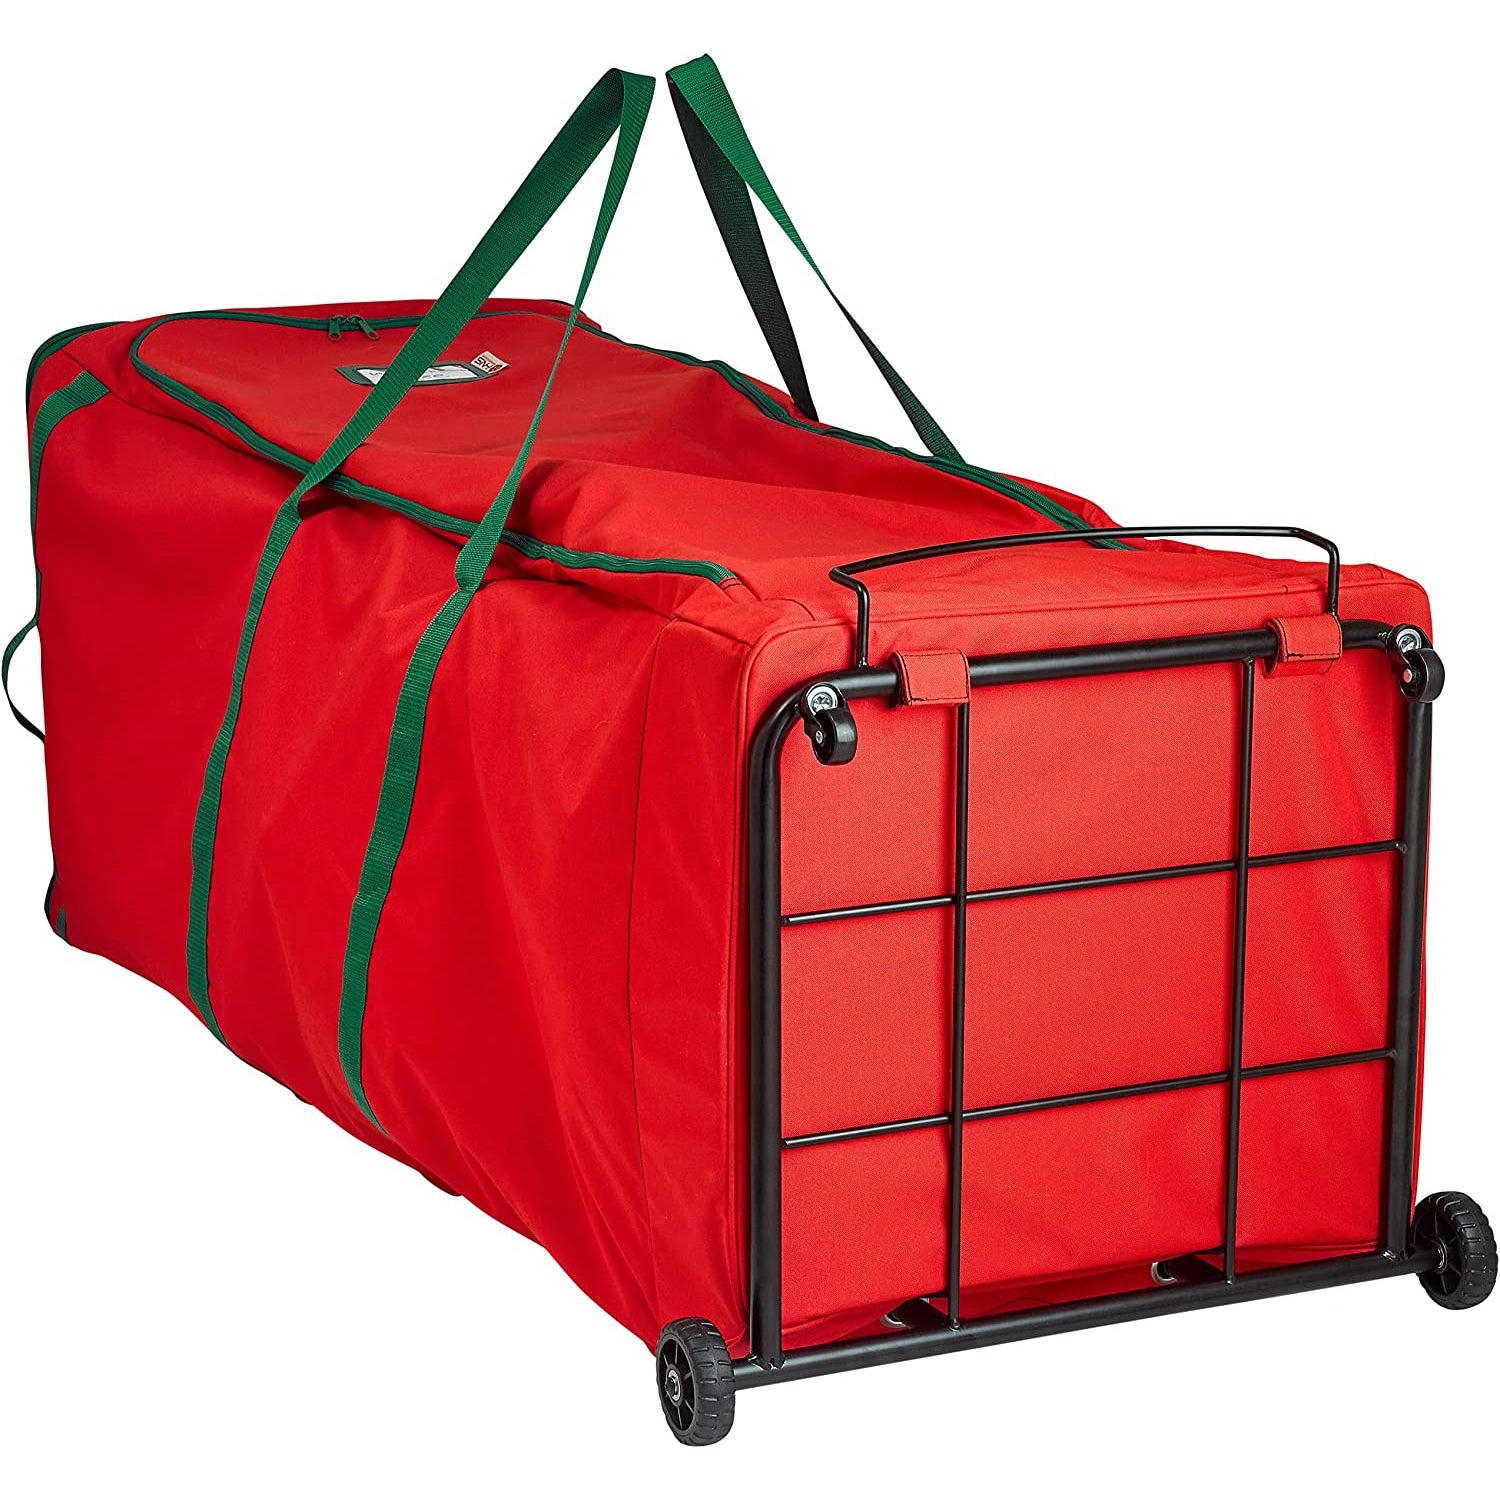 HOLDN’ STORAGE Rolling Christmas Tree Storage Bag with Wheels XXL - Fits Up to 12 Feet Artificial Tree, Heavy Duty Durable 600D Extra Large Tree Storage Bag - Tree and Garland Bag.